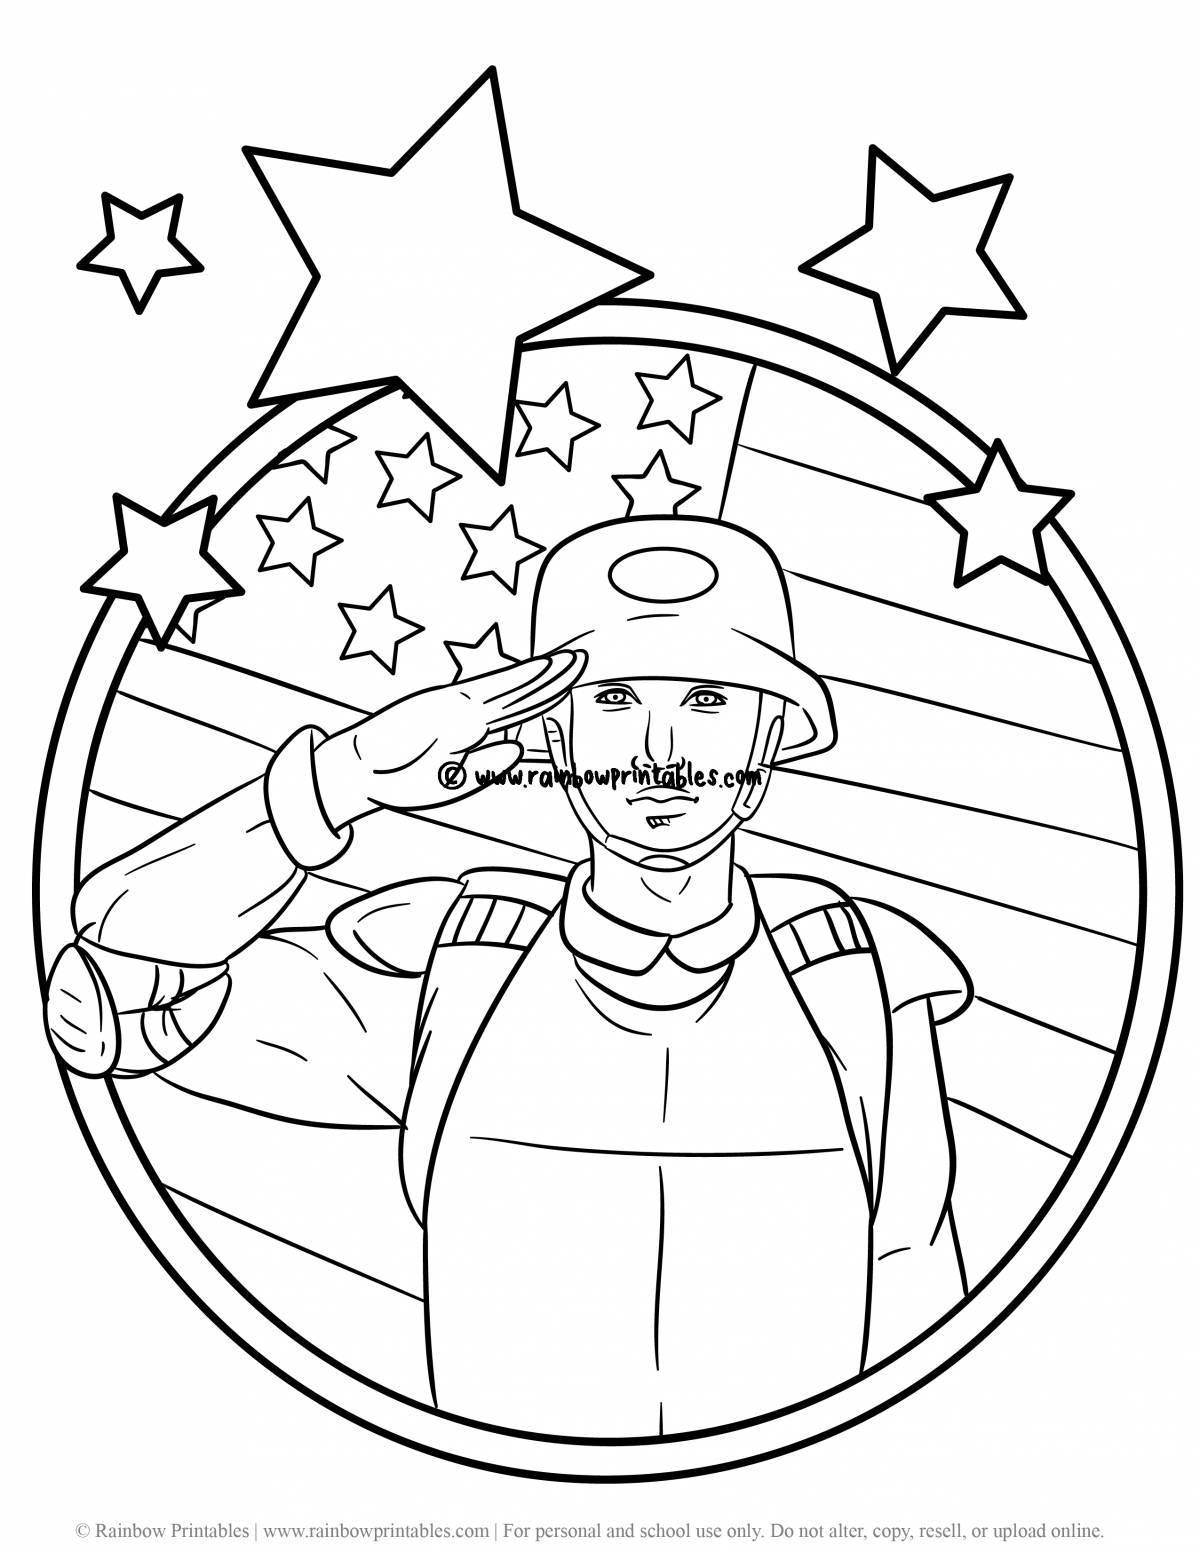 Bright soldier coloring book for 3-4 year olds